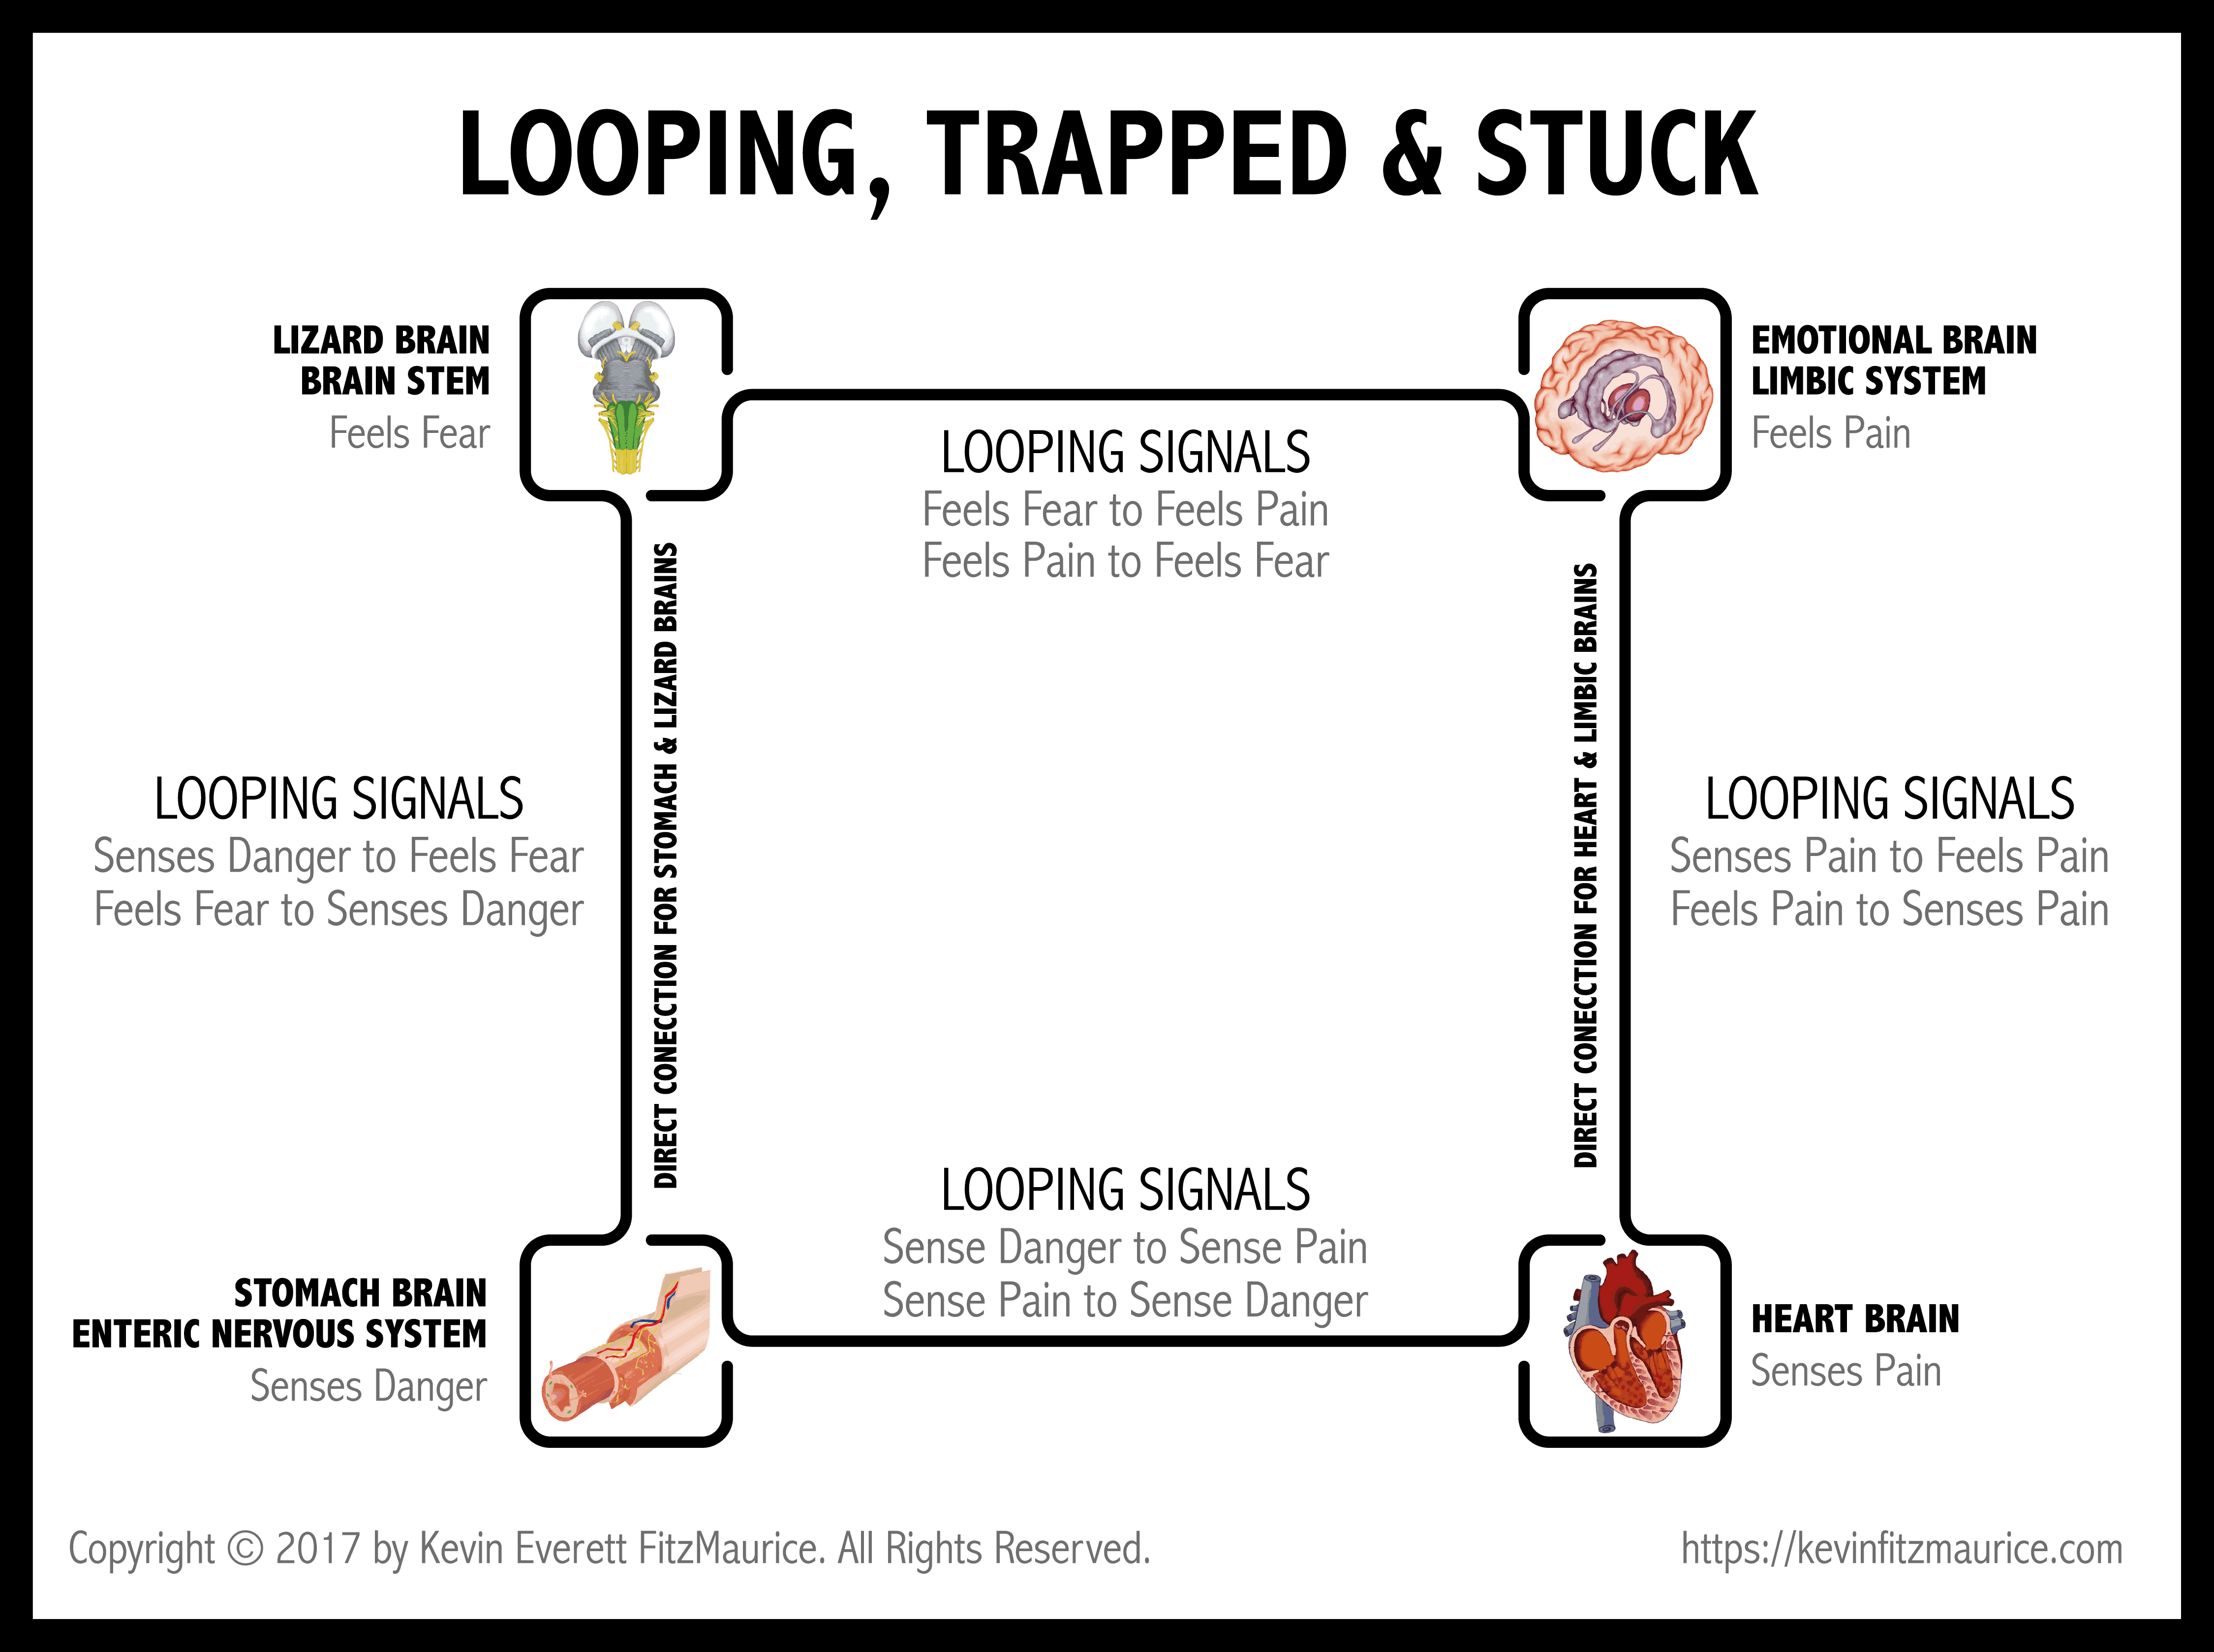 Diagram of Looping Brains Causing Problems